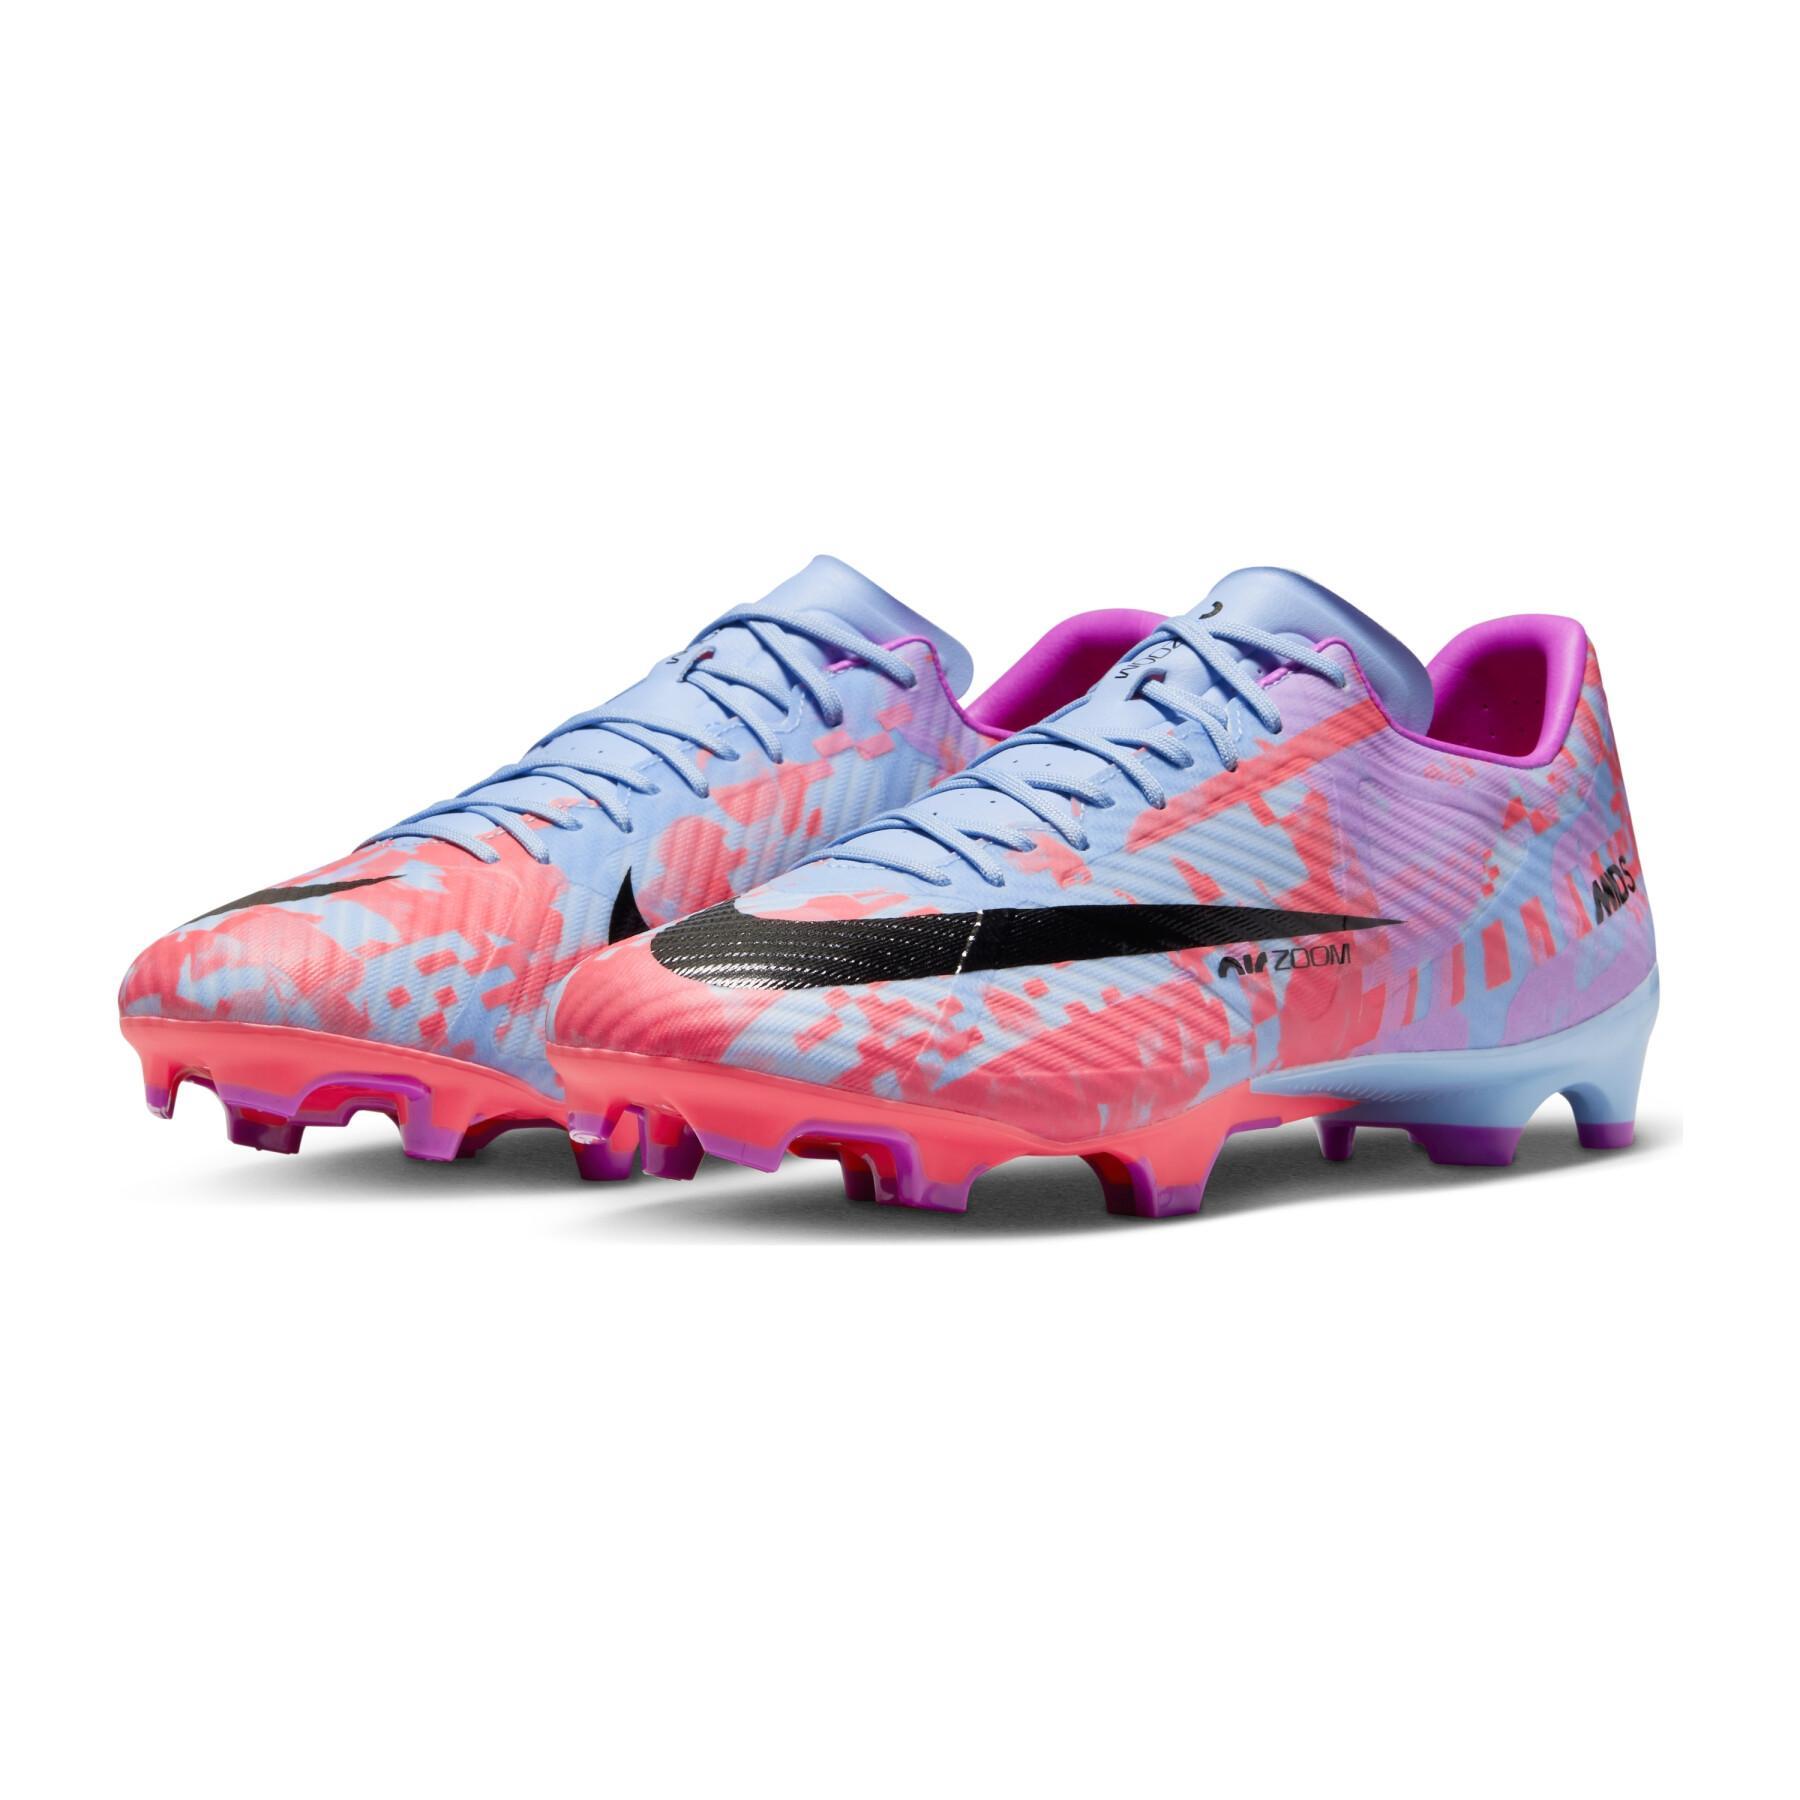 Soccer shoes Nike Mercurial Vapor 15 Academy FG/MG - MDS pack